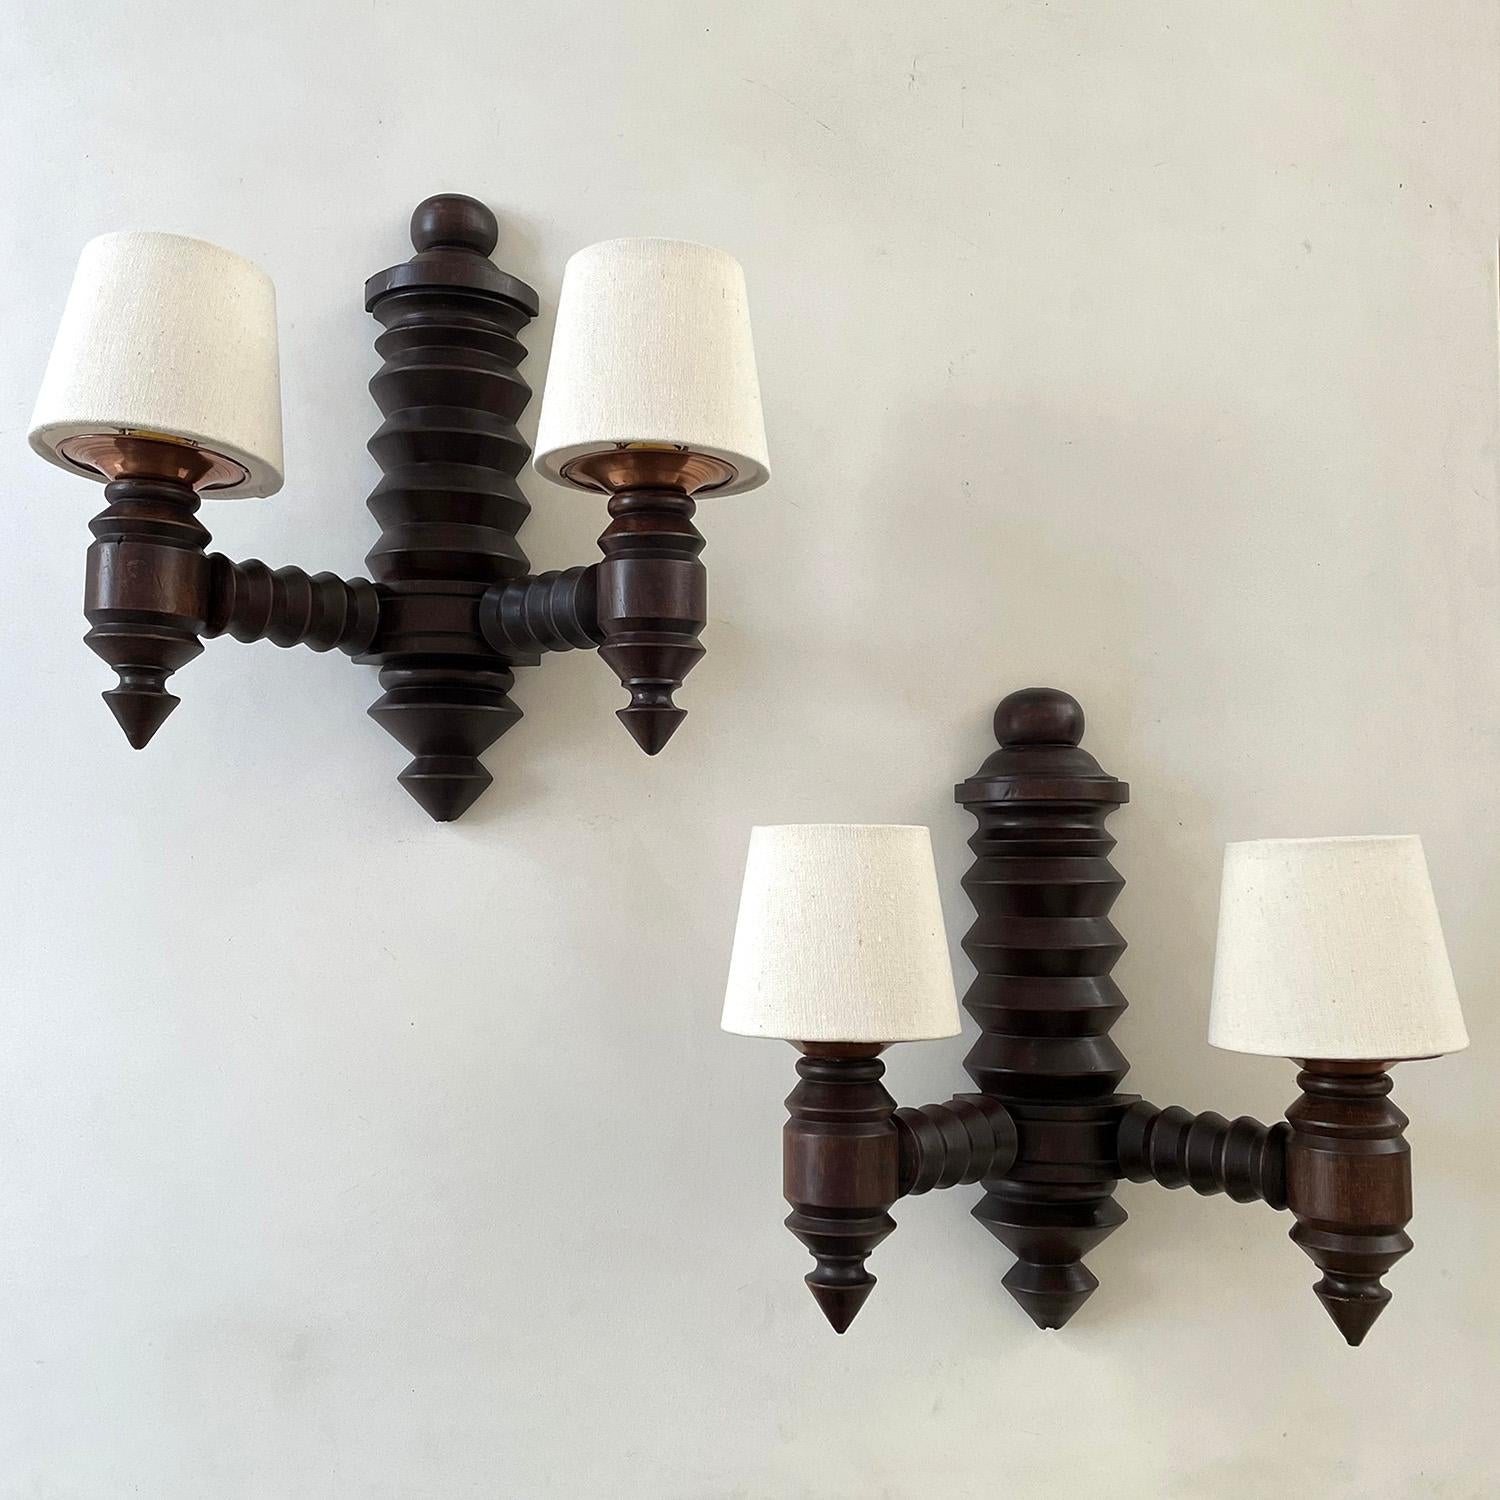 Pair of French carved oak wall sconces in the style of Dudouyt
France, circa 1940’s
Handmade, intricately carved design
Newly reconditioned
Patina to wood from age 
Perfectly imperfect
Newly rewired
New linen shades 
Sold as a pair
Single socket